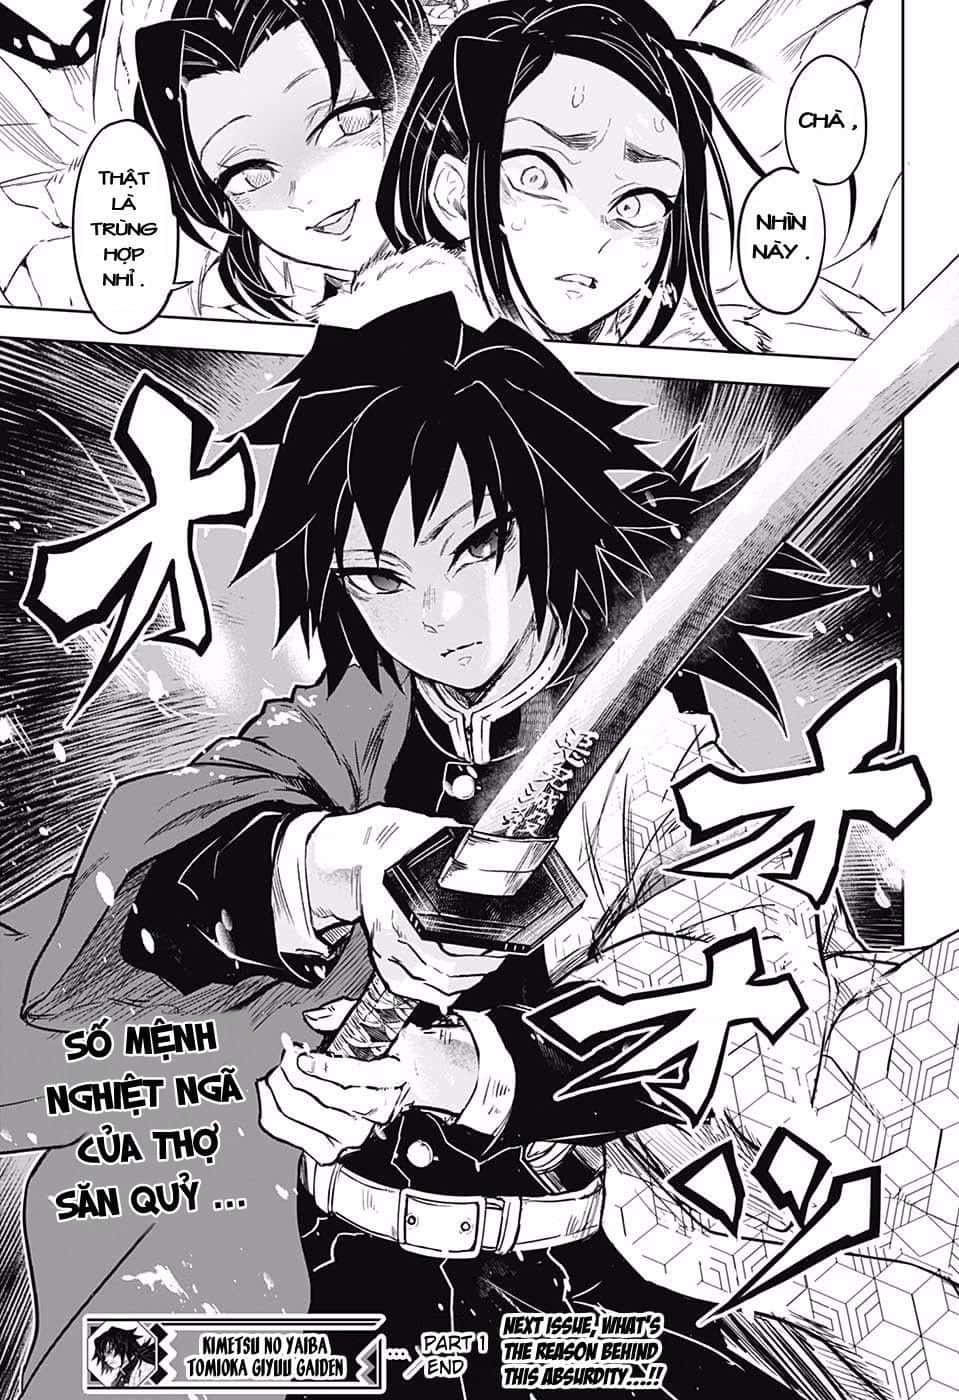 A Manga Page With Two Characters Holding Swords Background